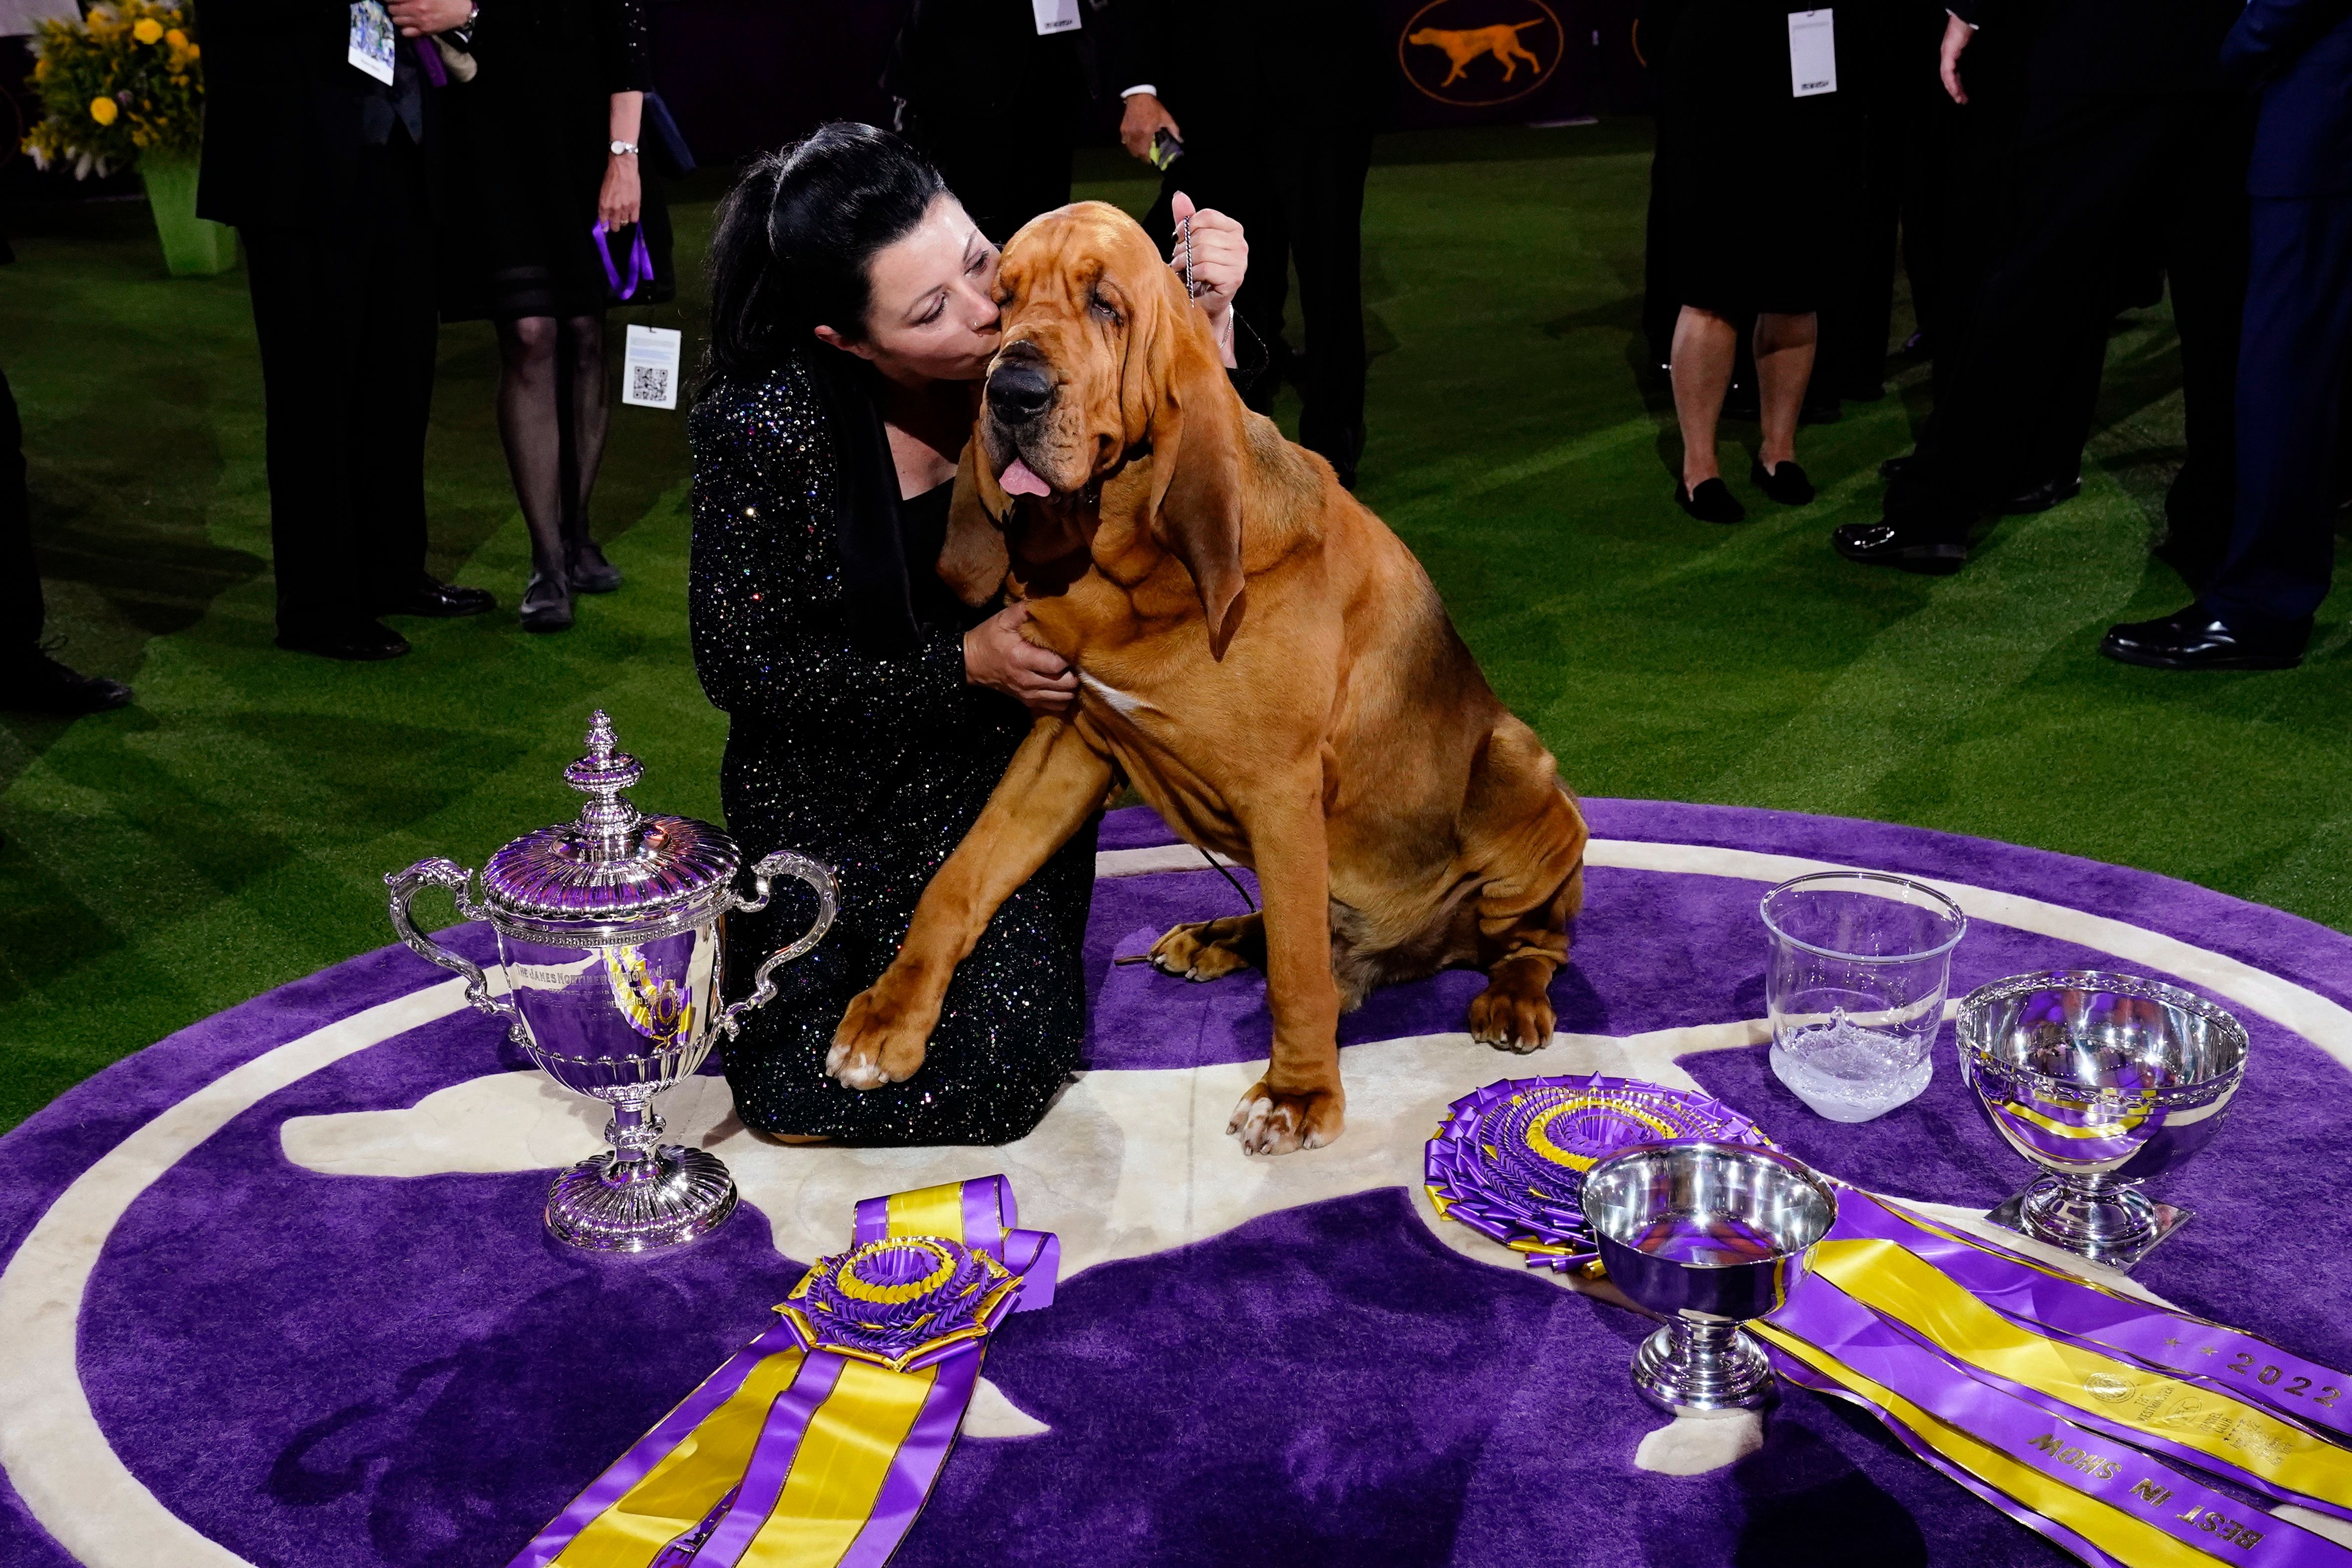 Heather Helmer kneels next to her dog Trumpet, the winner of the Westminster Dog Show.